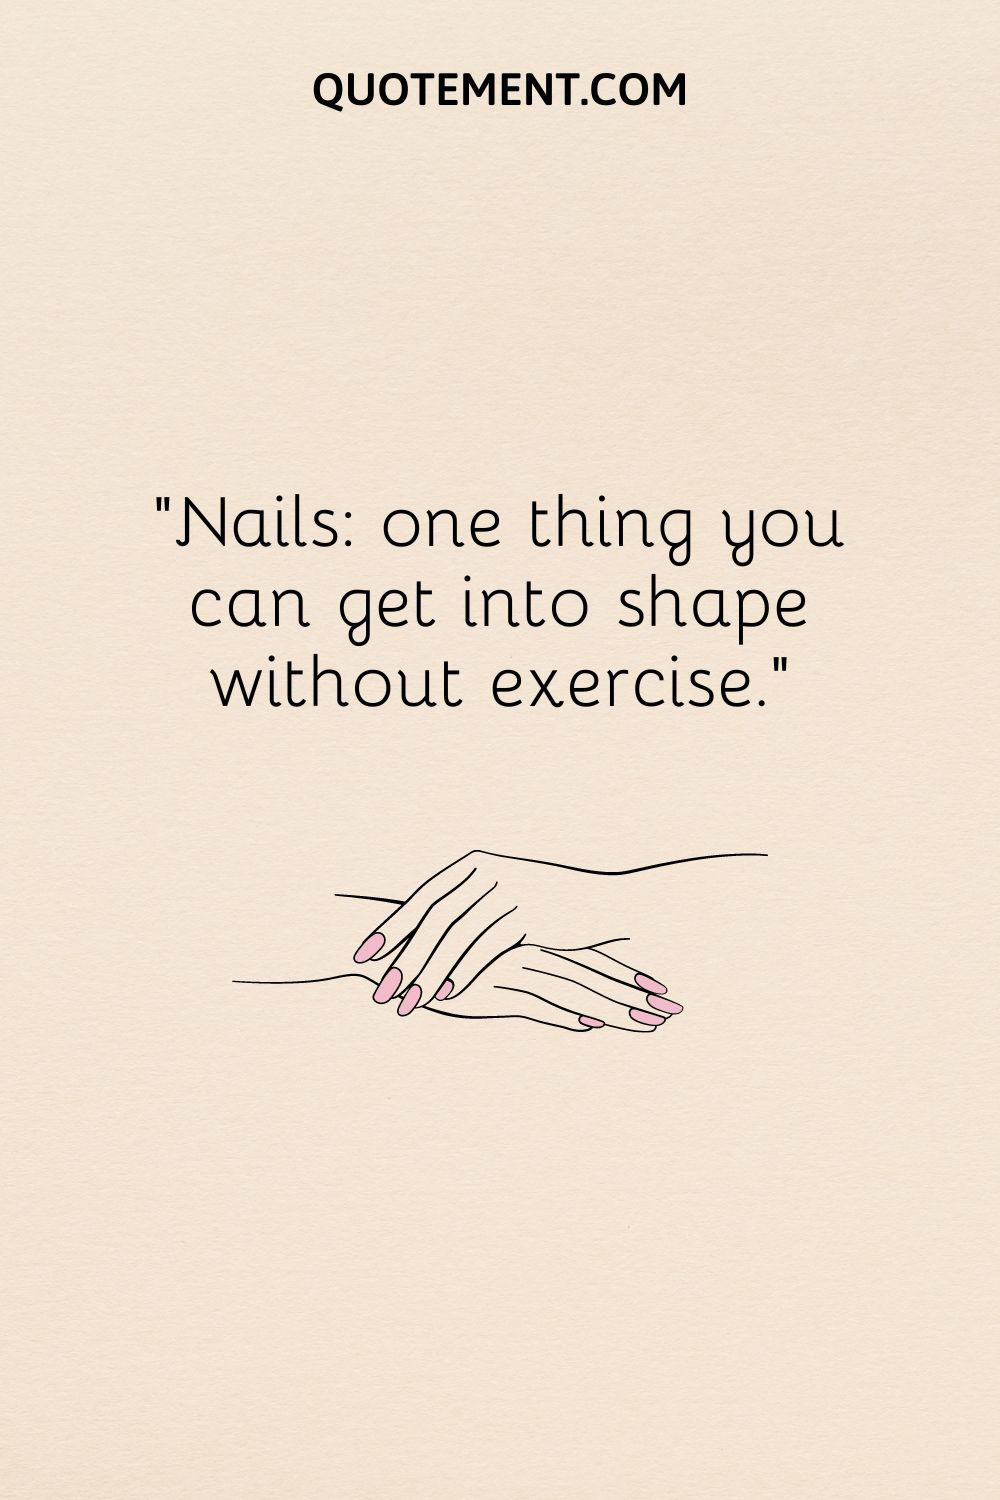 hands with pink nails illustration representing nails quote for instagram